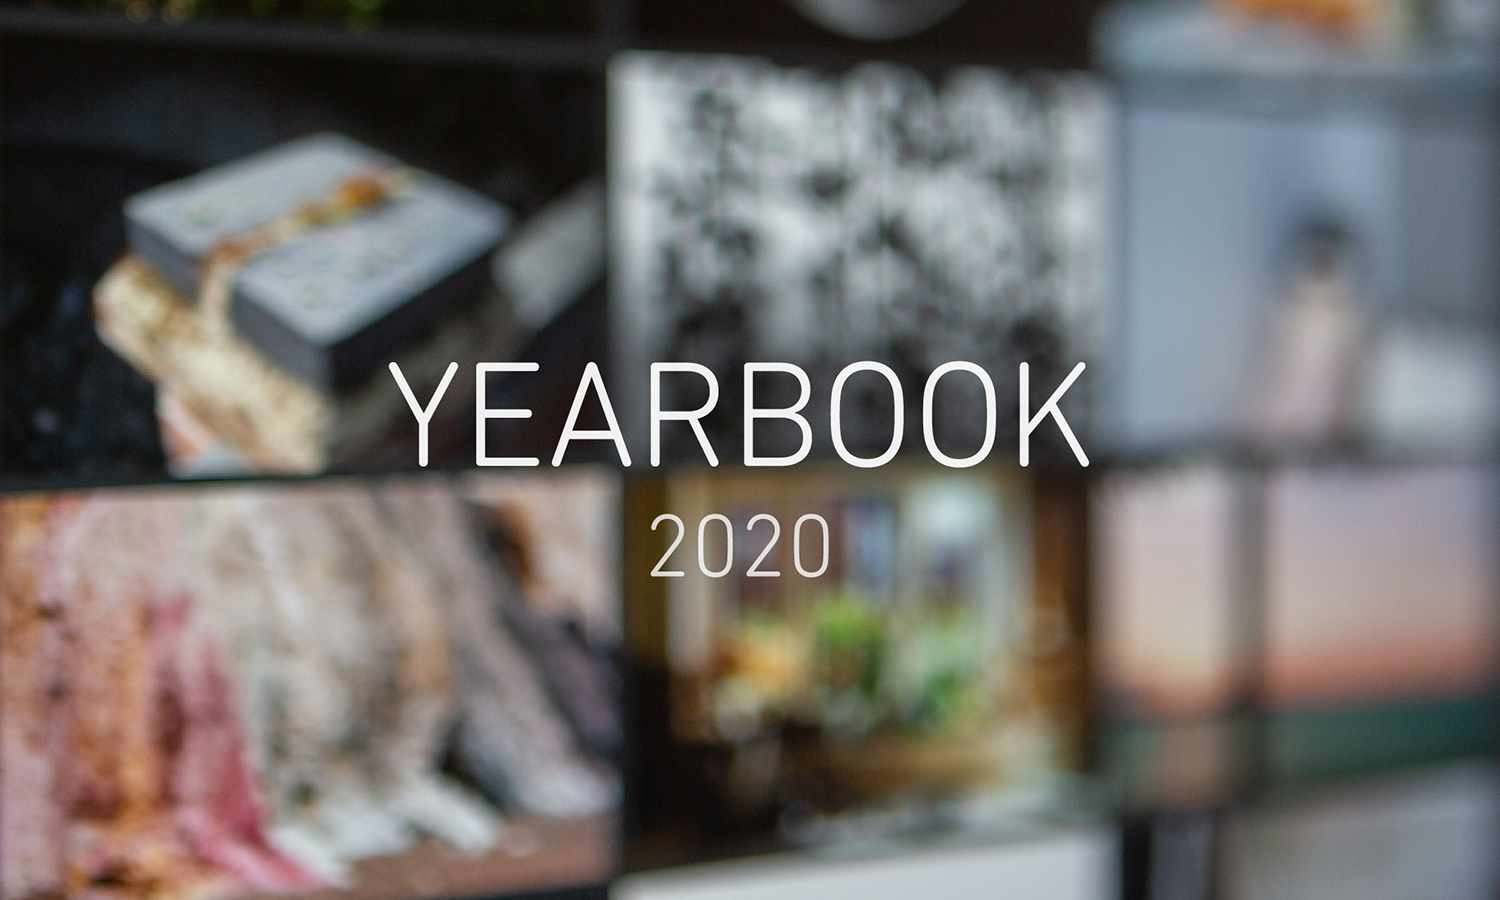 Image of a screen showing an online photography exhibition, very soft focus, with text in the middle reading 'YEARBOOK 2020'